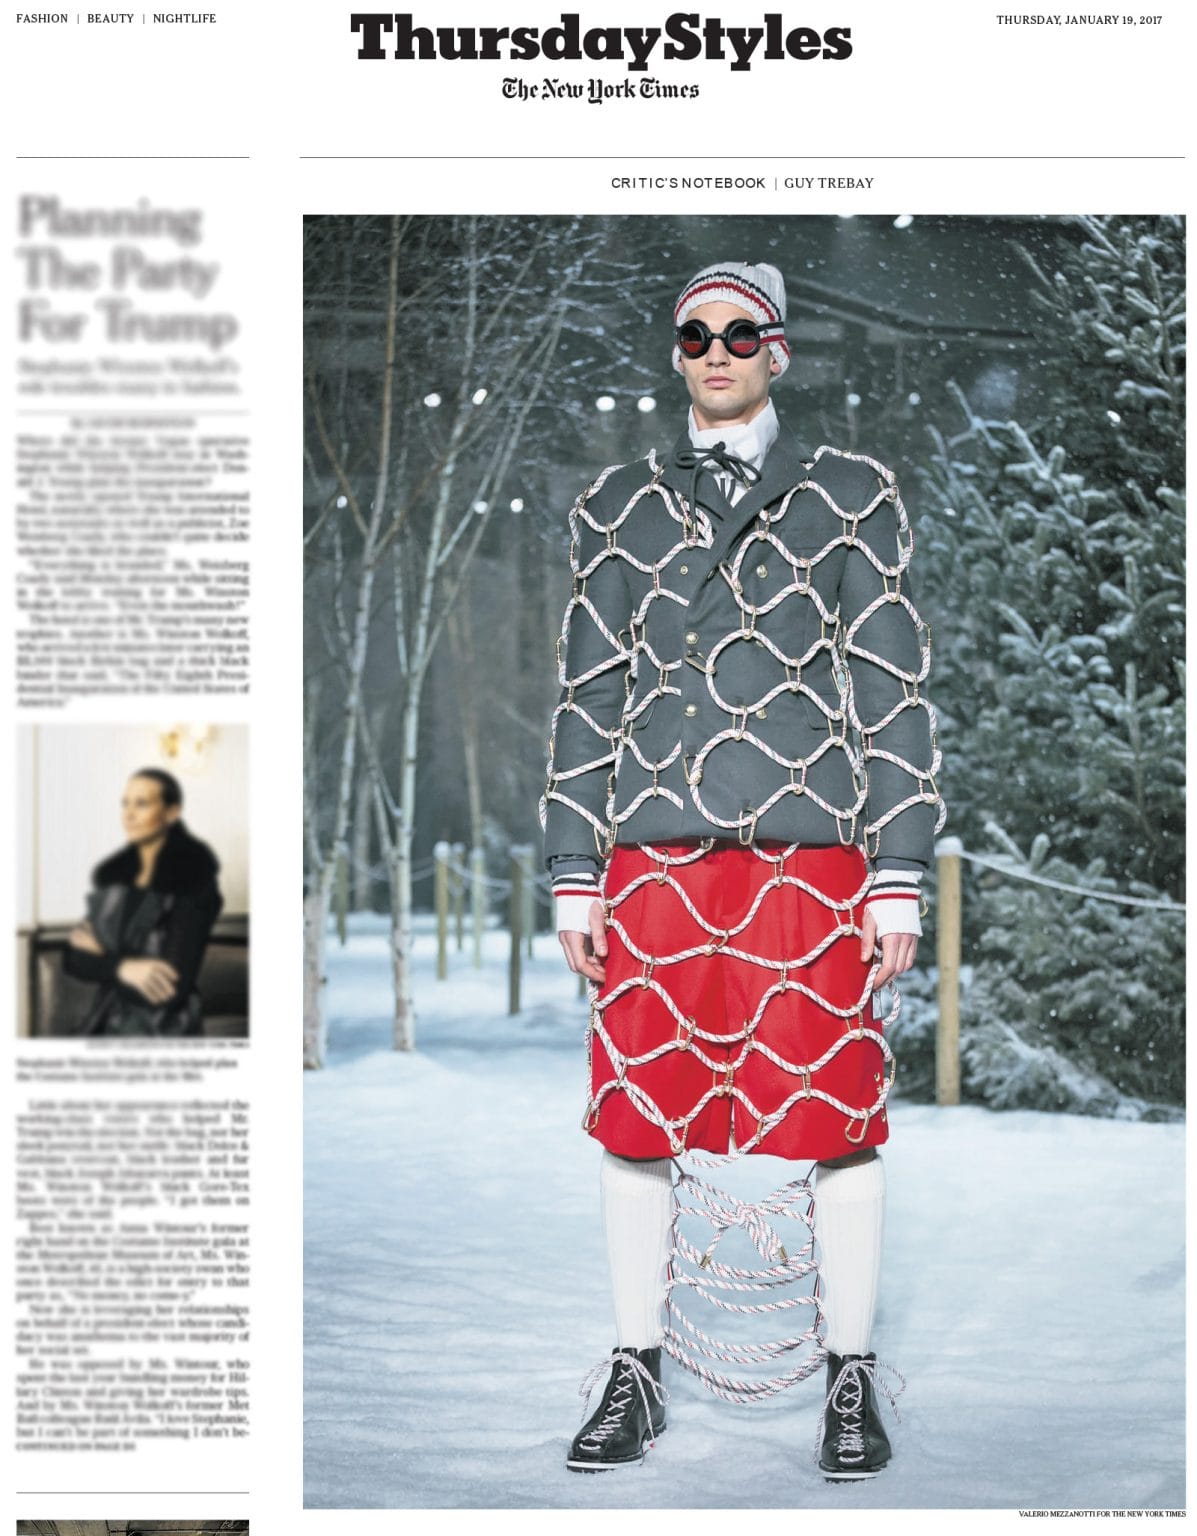 Thom Browne Fashion show, Photo by Valerio Mezzanotti for The New York Times